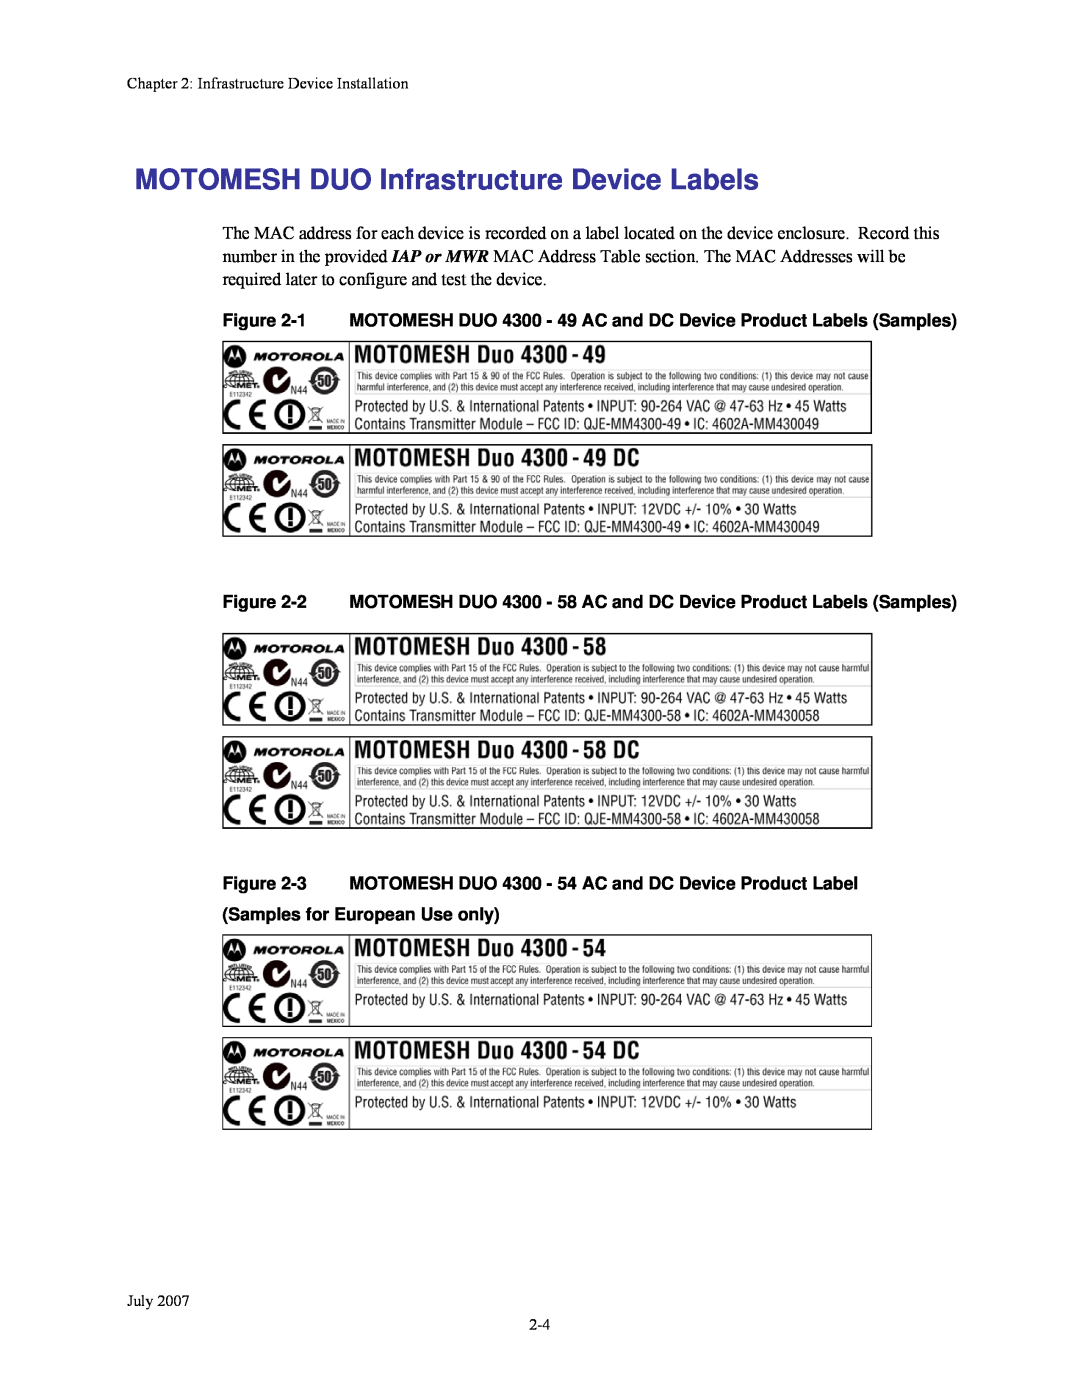 Nikon 4300 manual MOTOMESH DUO Infrastructure Device Labels 